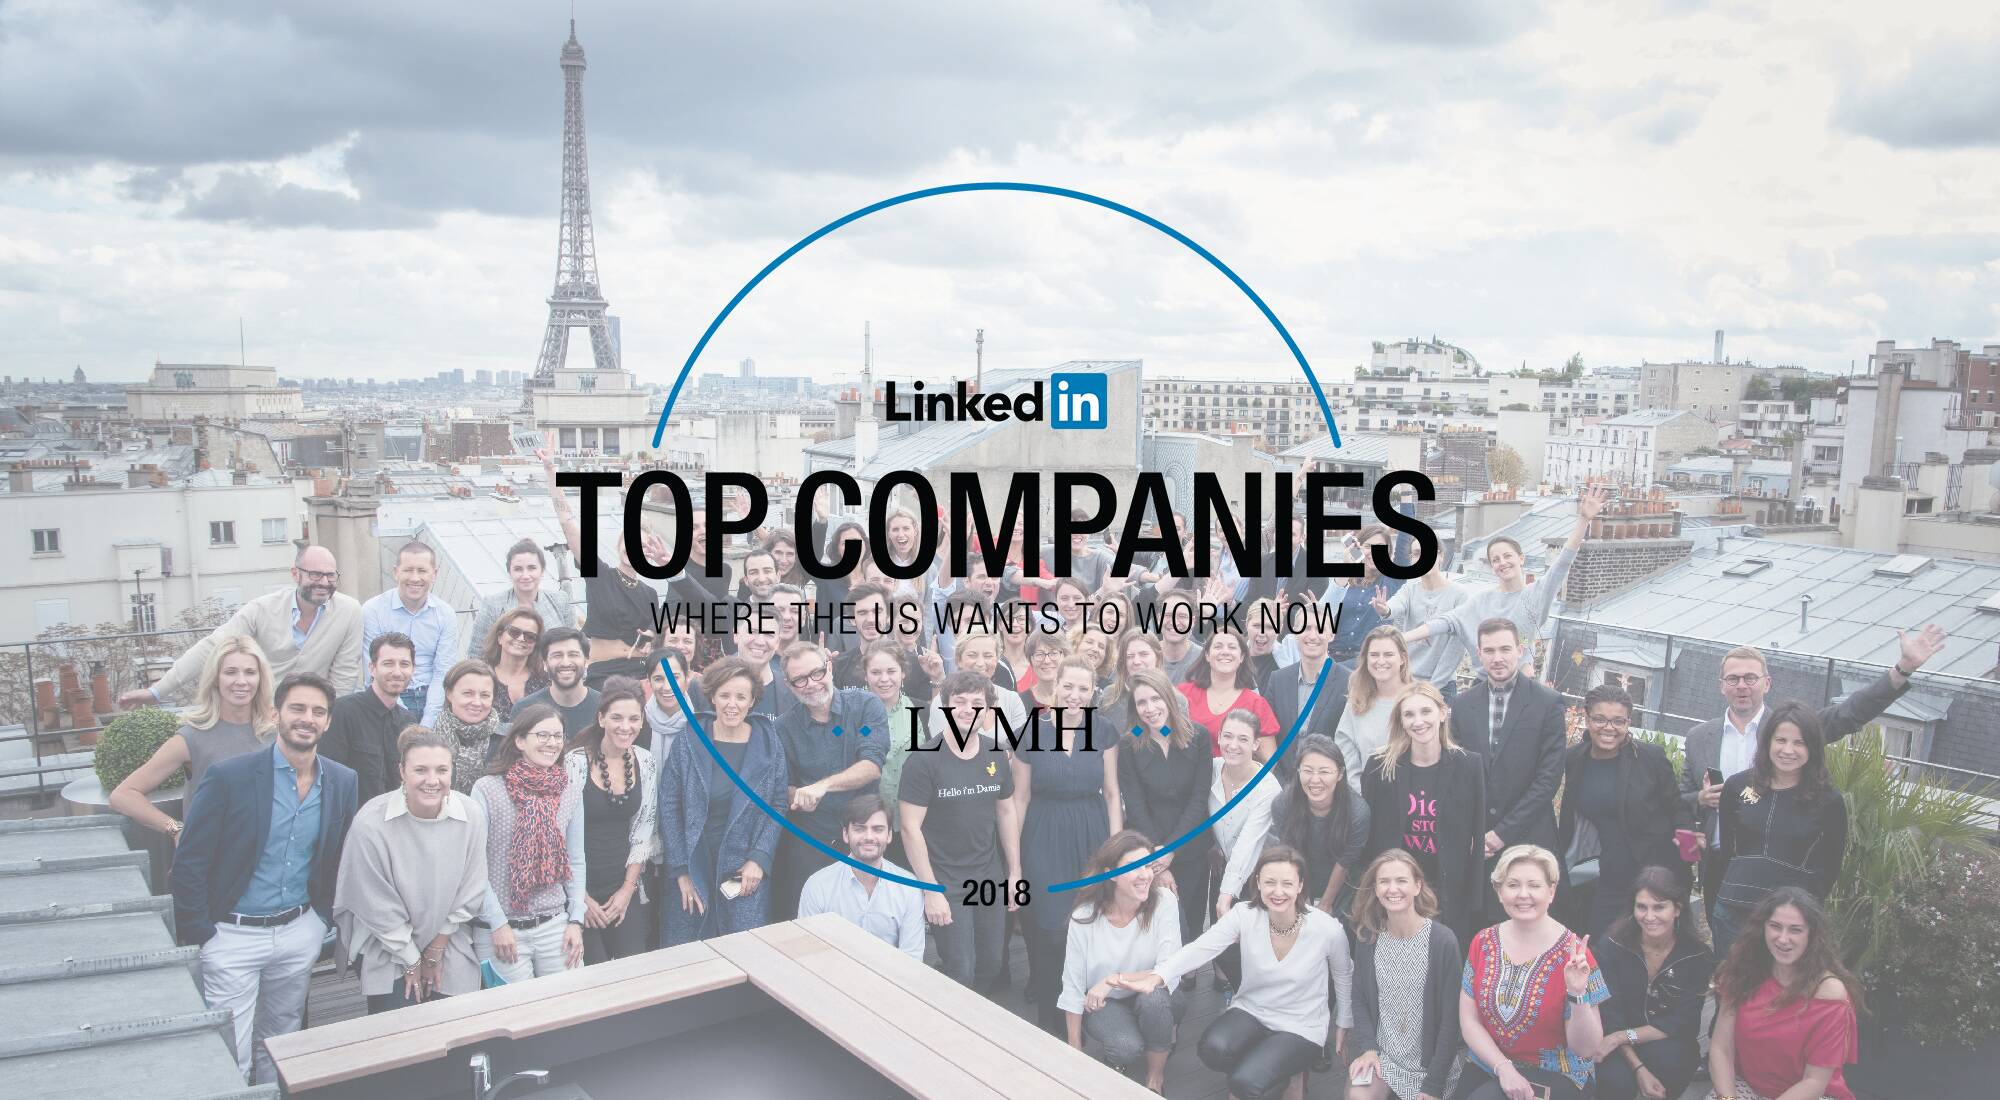 LVMH most attractive employer in France in LinkedIn Top Companies